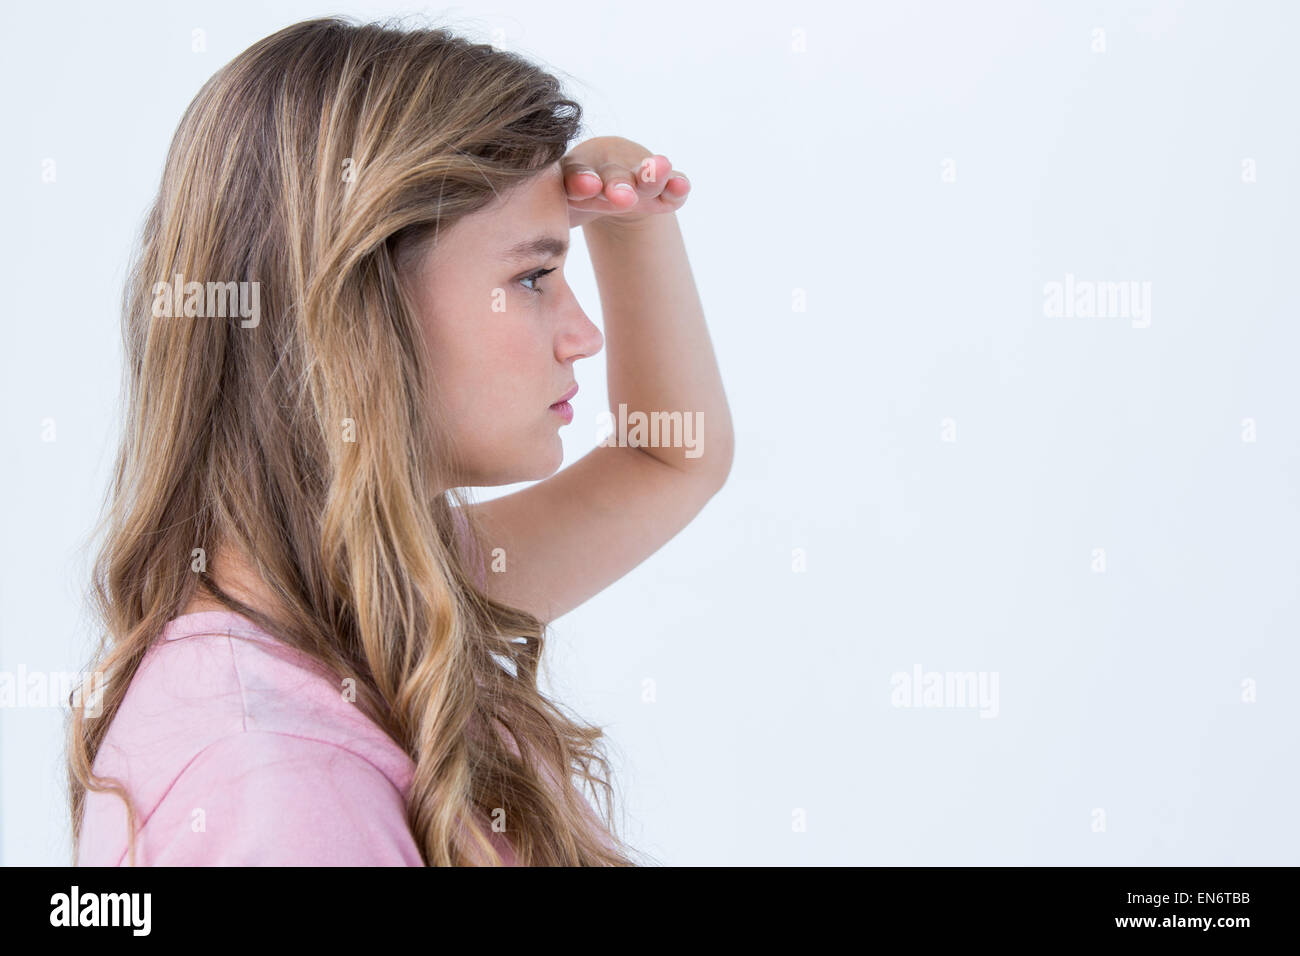 Pretty blonde looking the horizon with hand on forehead Stock Photo